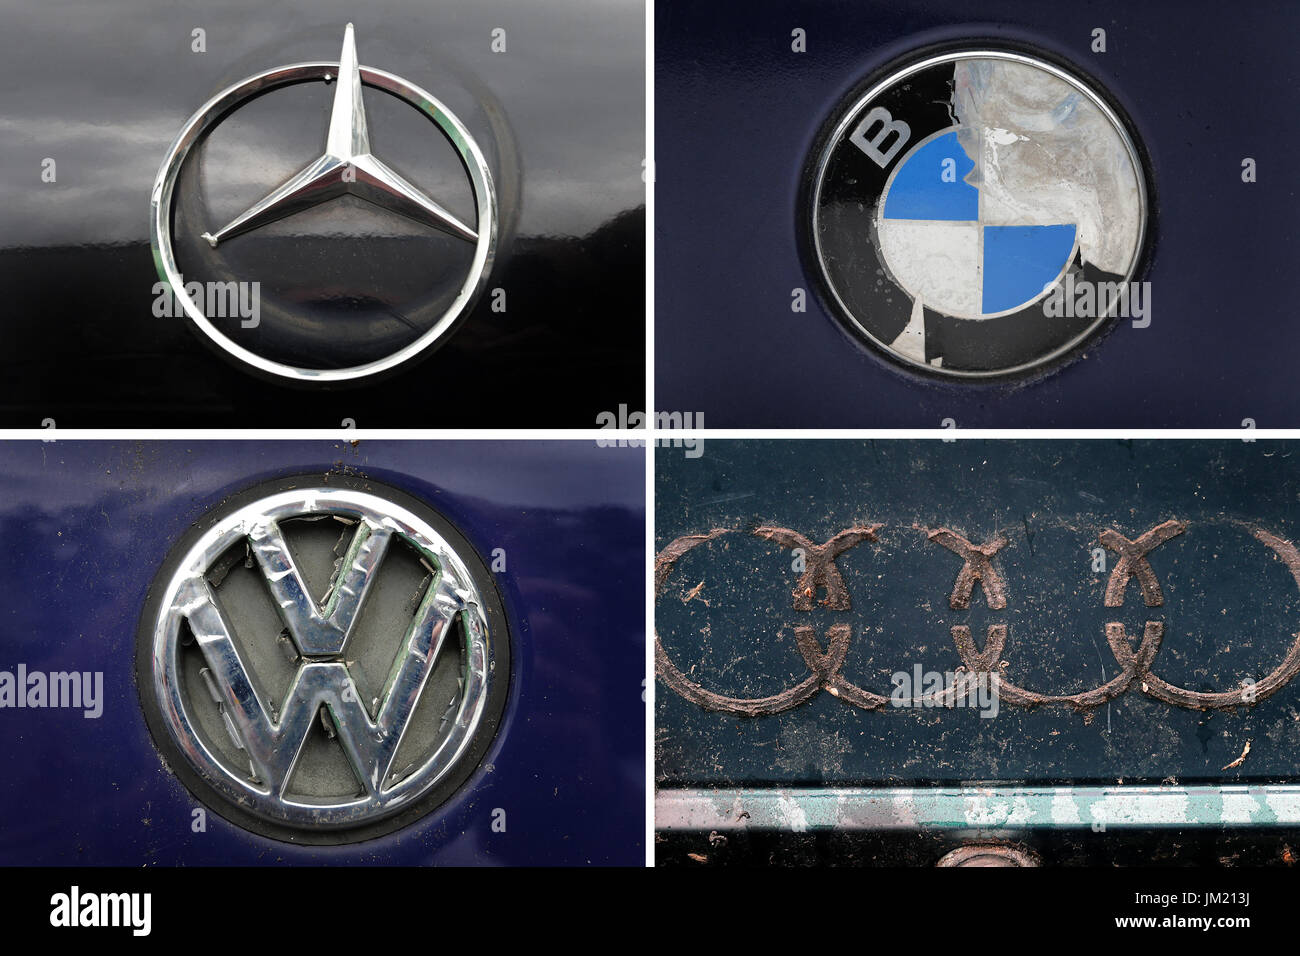 Betzigau, Germany. 25th July, 2017. The picture combo shows damaged logos as well as traces of logos of the German automotive producers Mercedes, BMW, VM and Audi, taken on a scrap yard in Betzigau, Germany, 25 July 2017. Photo: Karl-Josef Hildenbrand/dpa/Alamy Live News Stock Photo